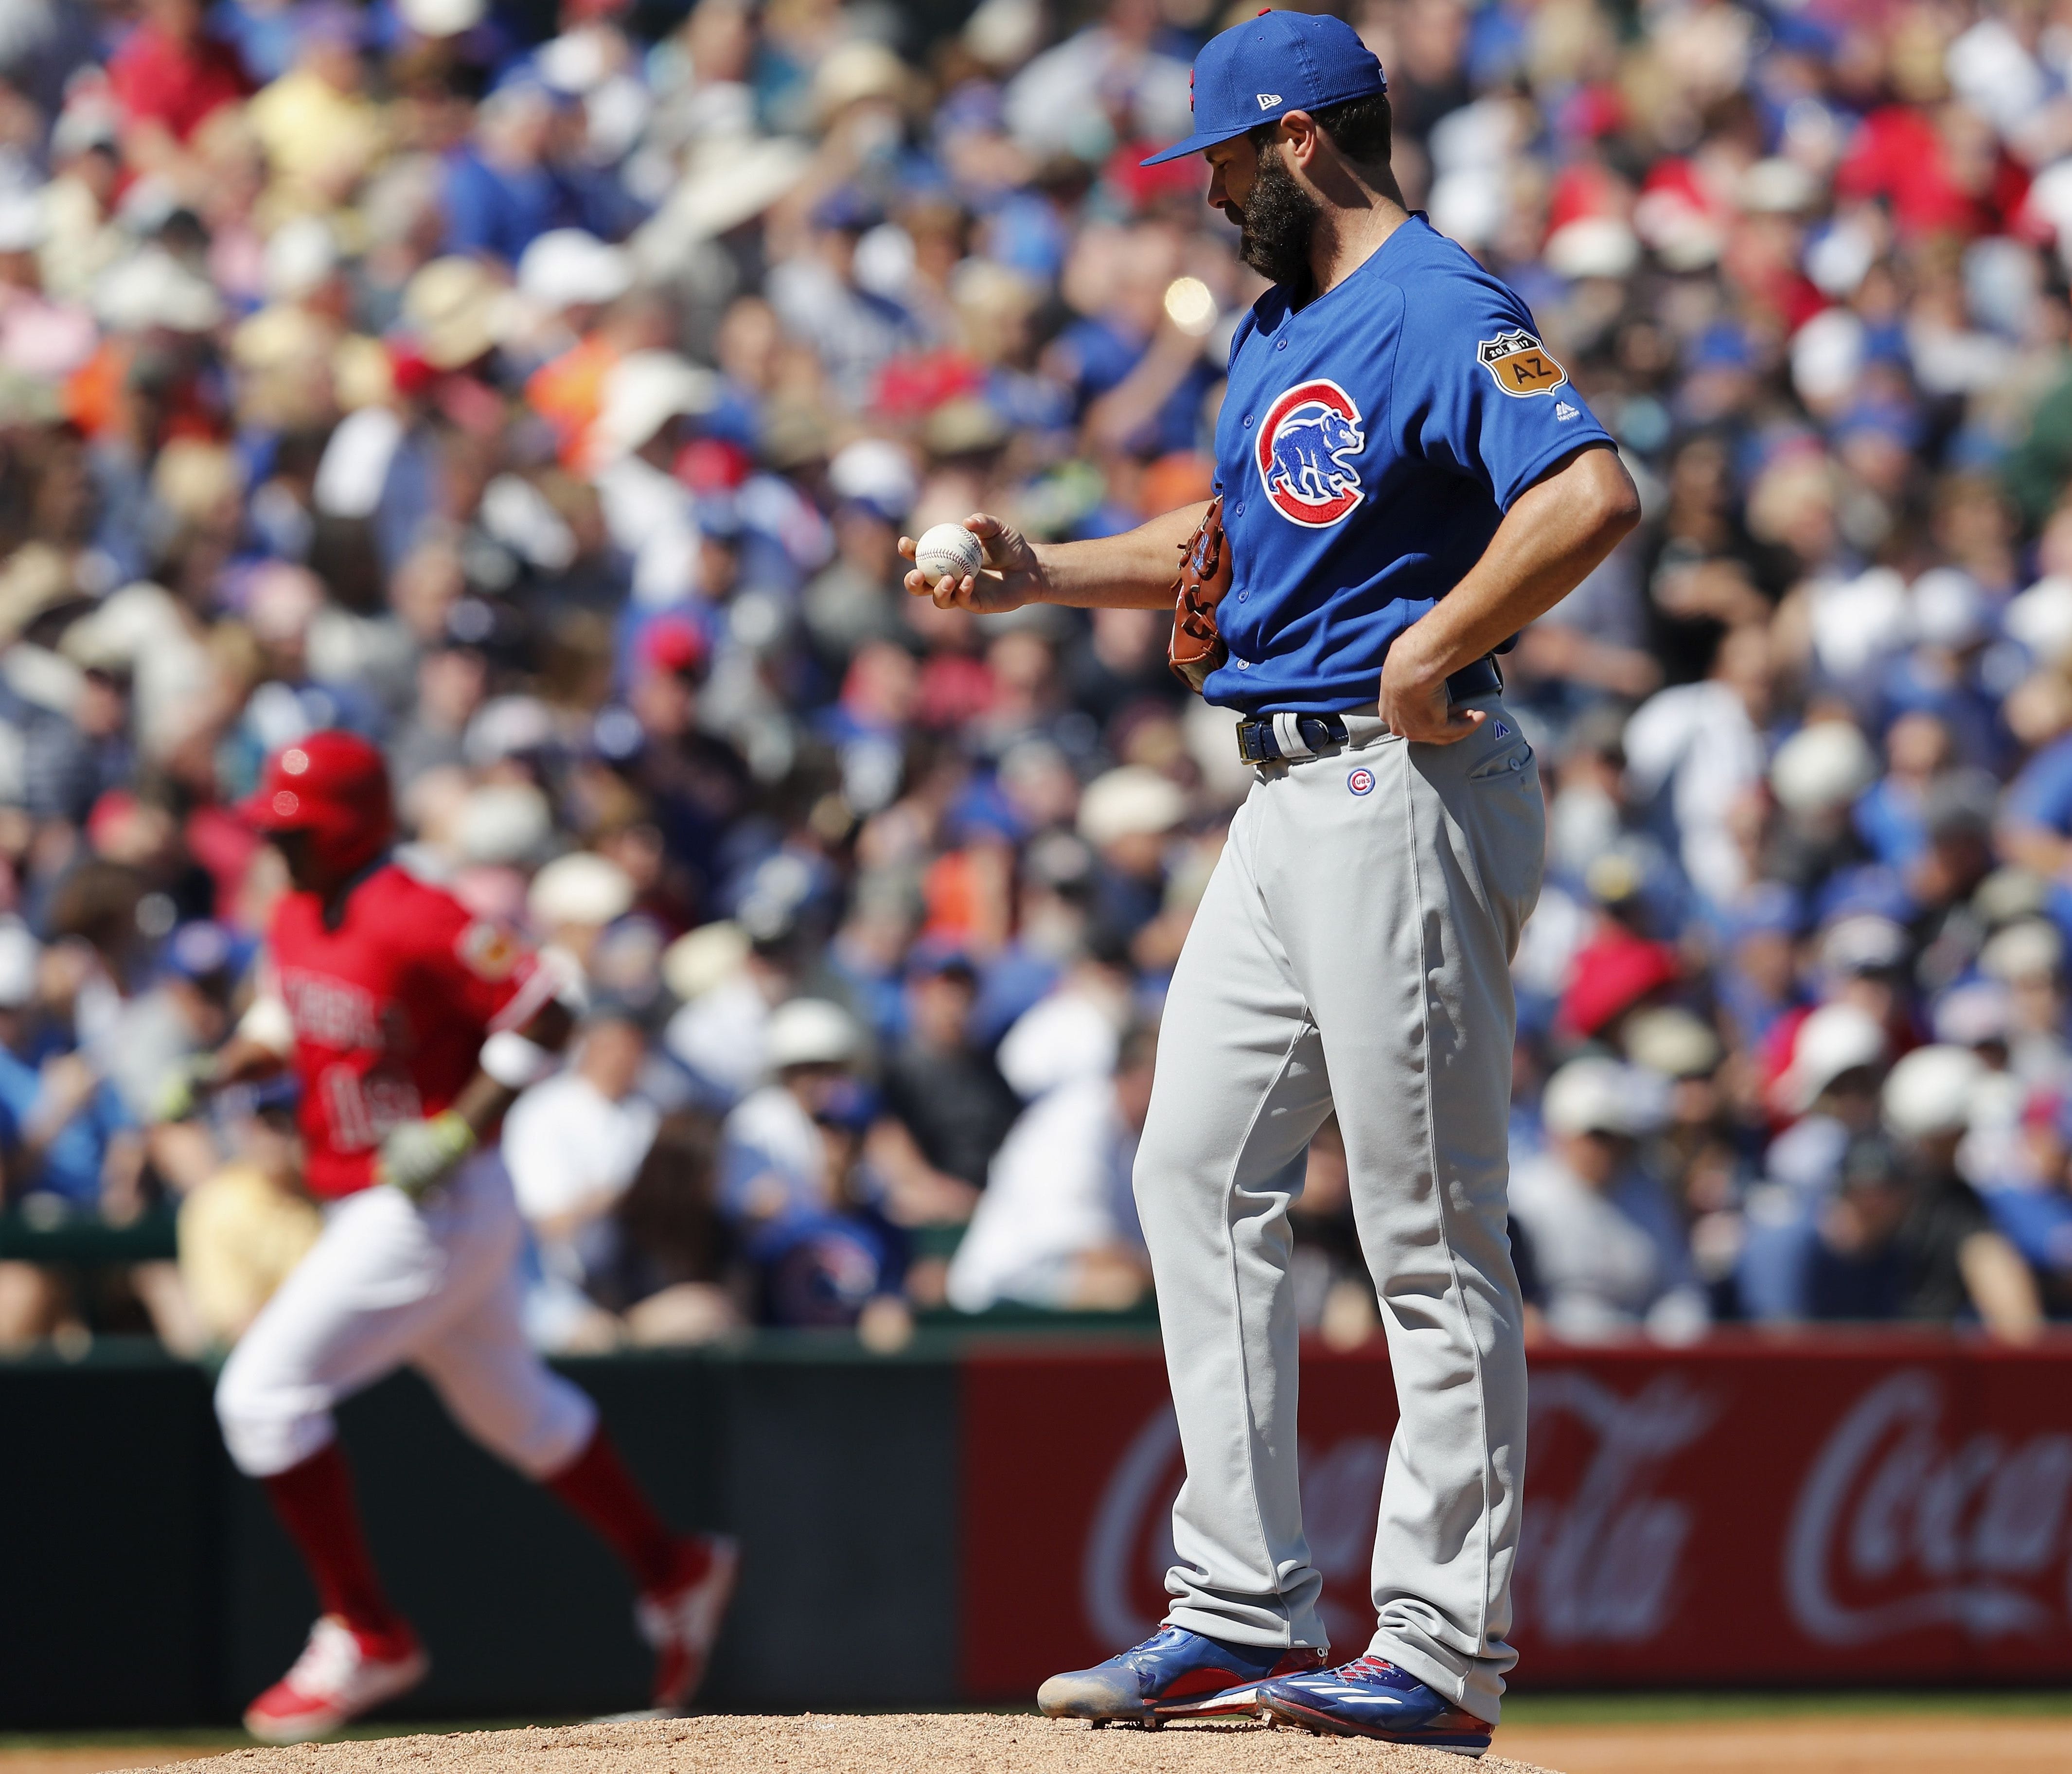 TEMPE, AZ - MARCH 06:  Jake Arrieta #49 of the Chicago Cubs reacts on the mound as Jefry Marte #19 of the Los Angeles Angels rounds third base after a home run in the second inning during the spring training game at Tempe Diablo Stadium on March 6, 2